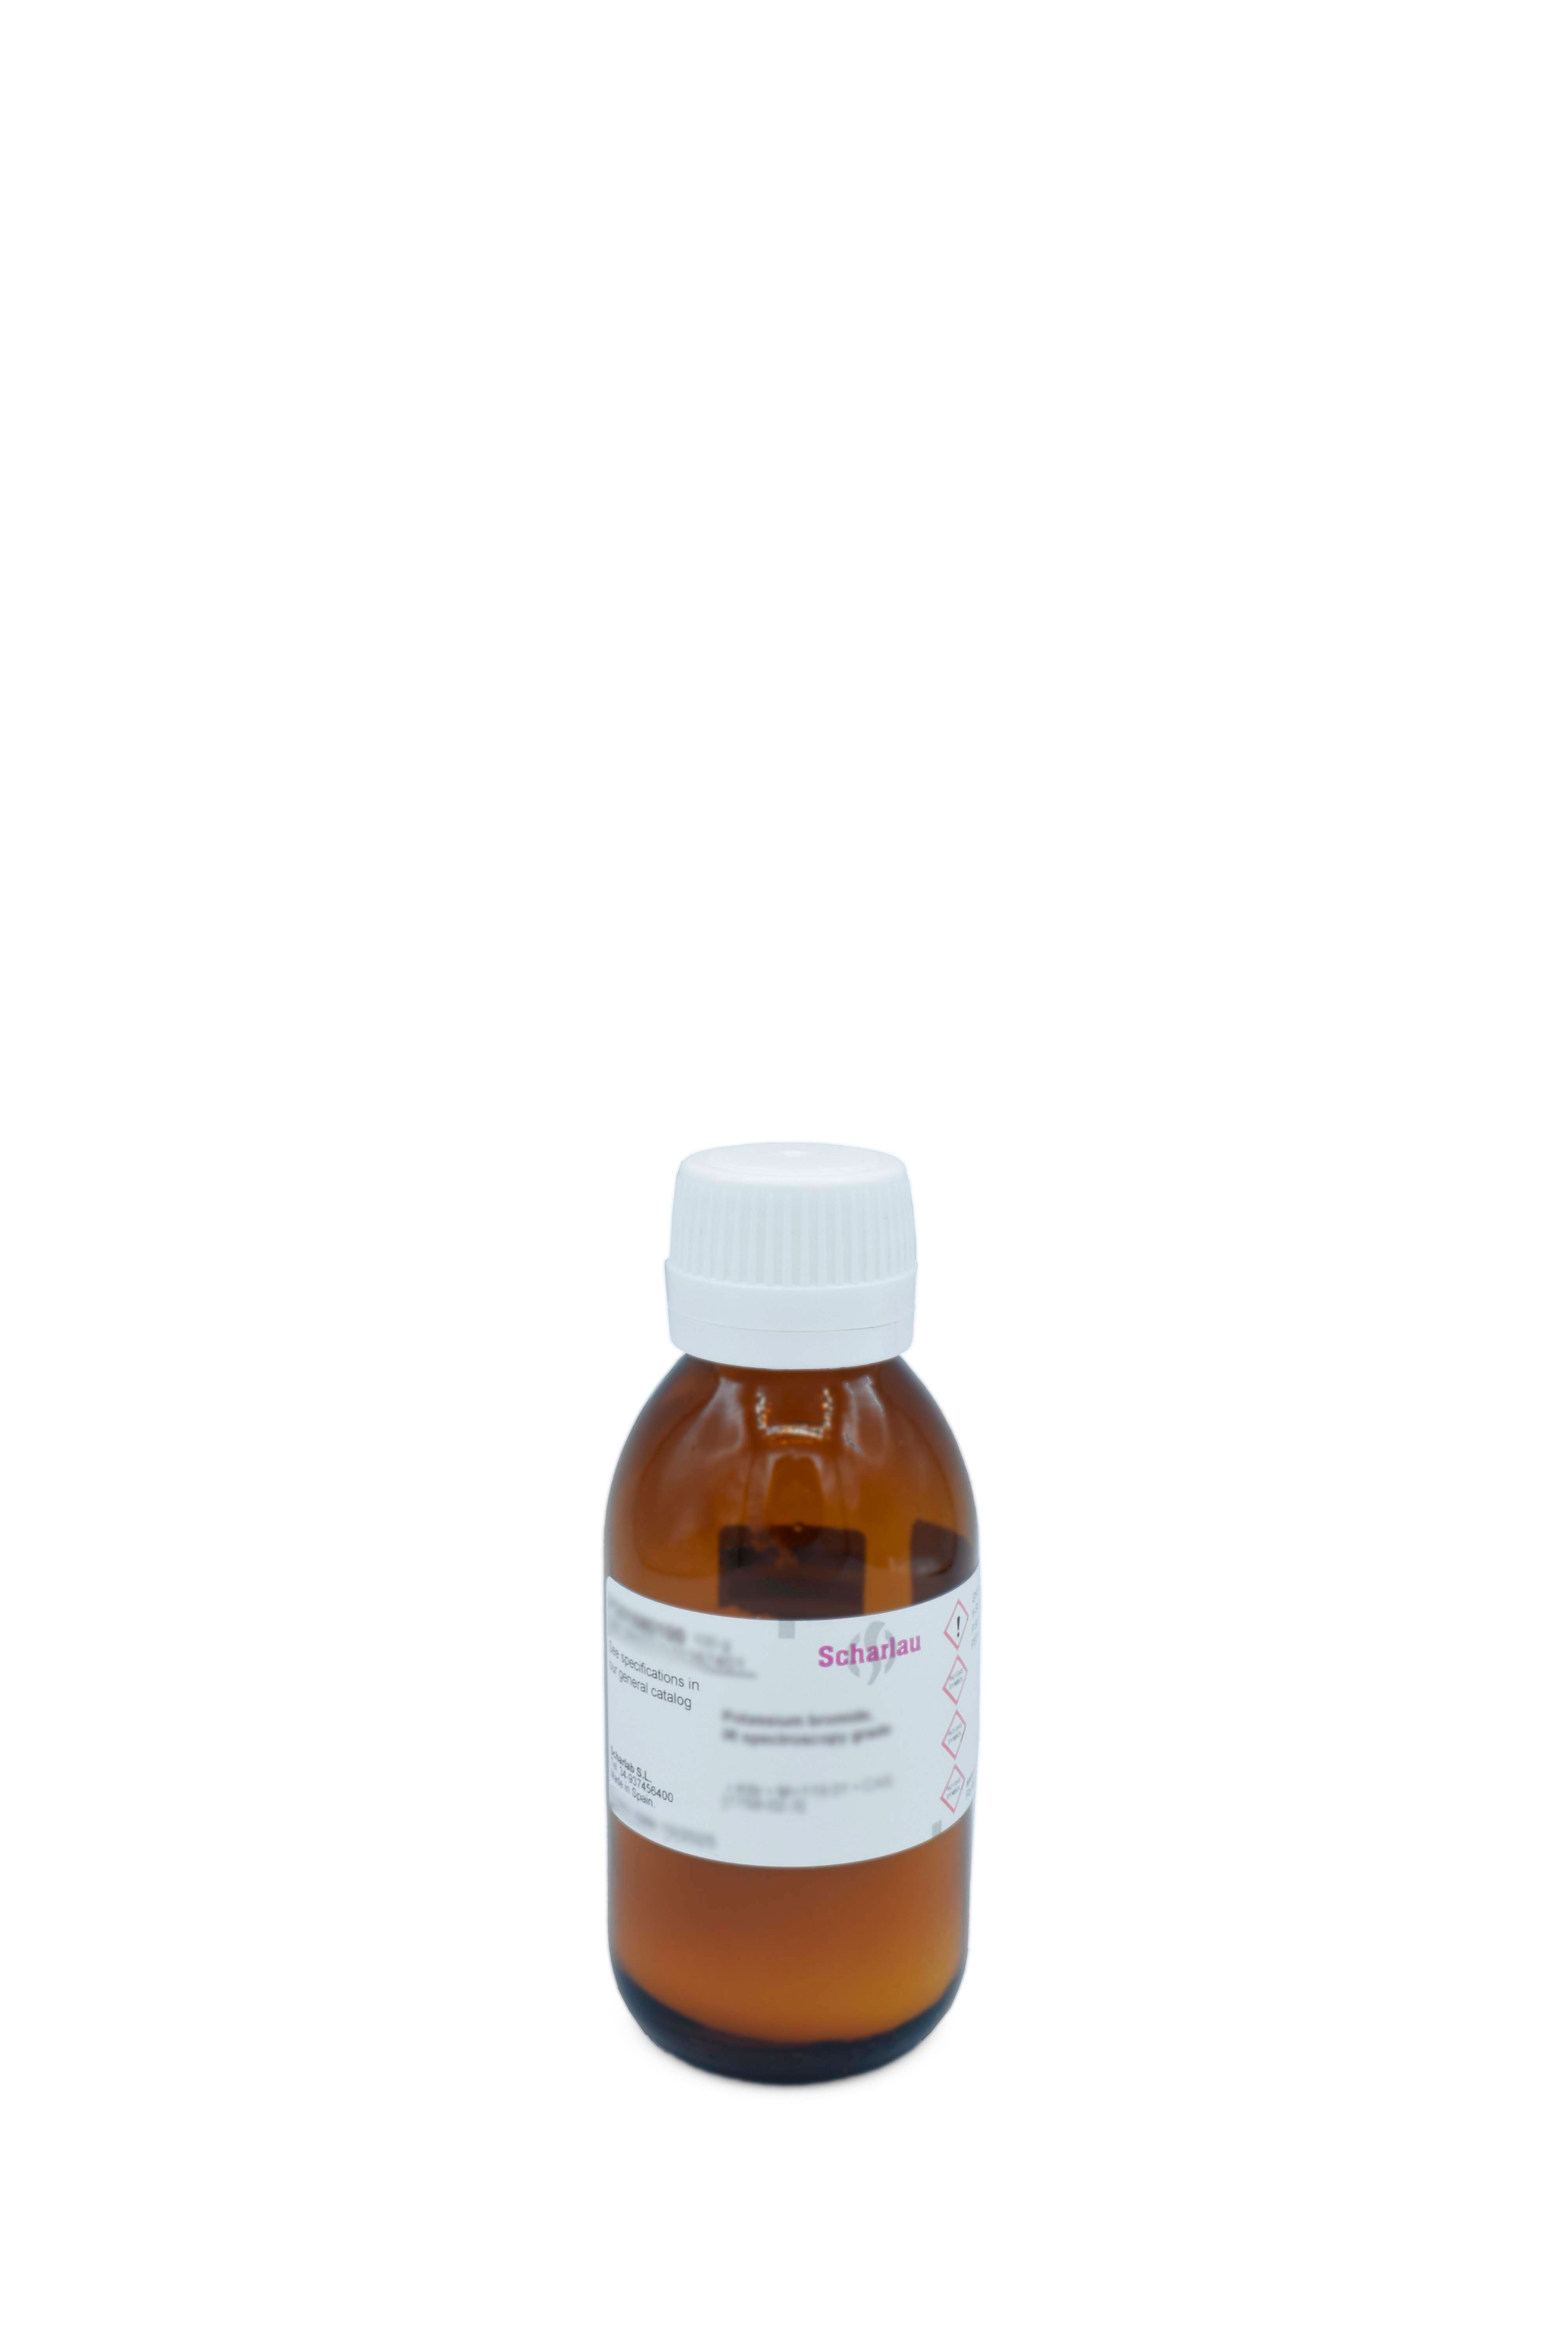 Lactophenol blue, solution for microscopy